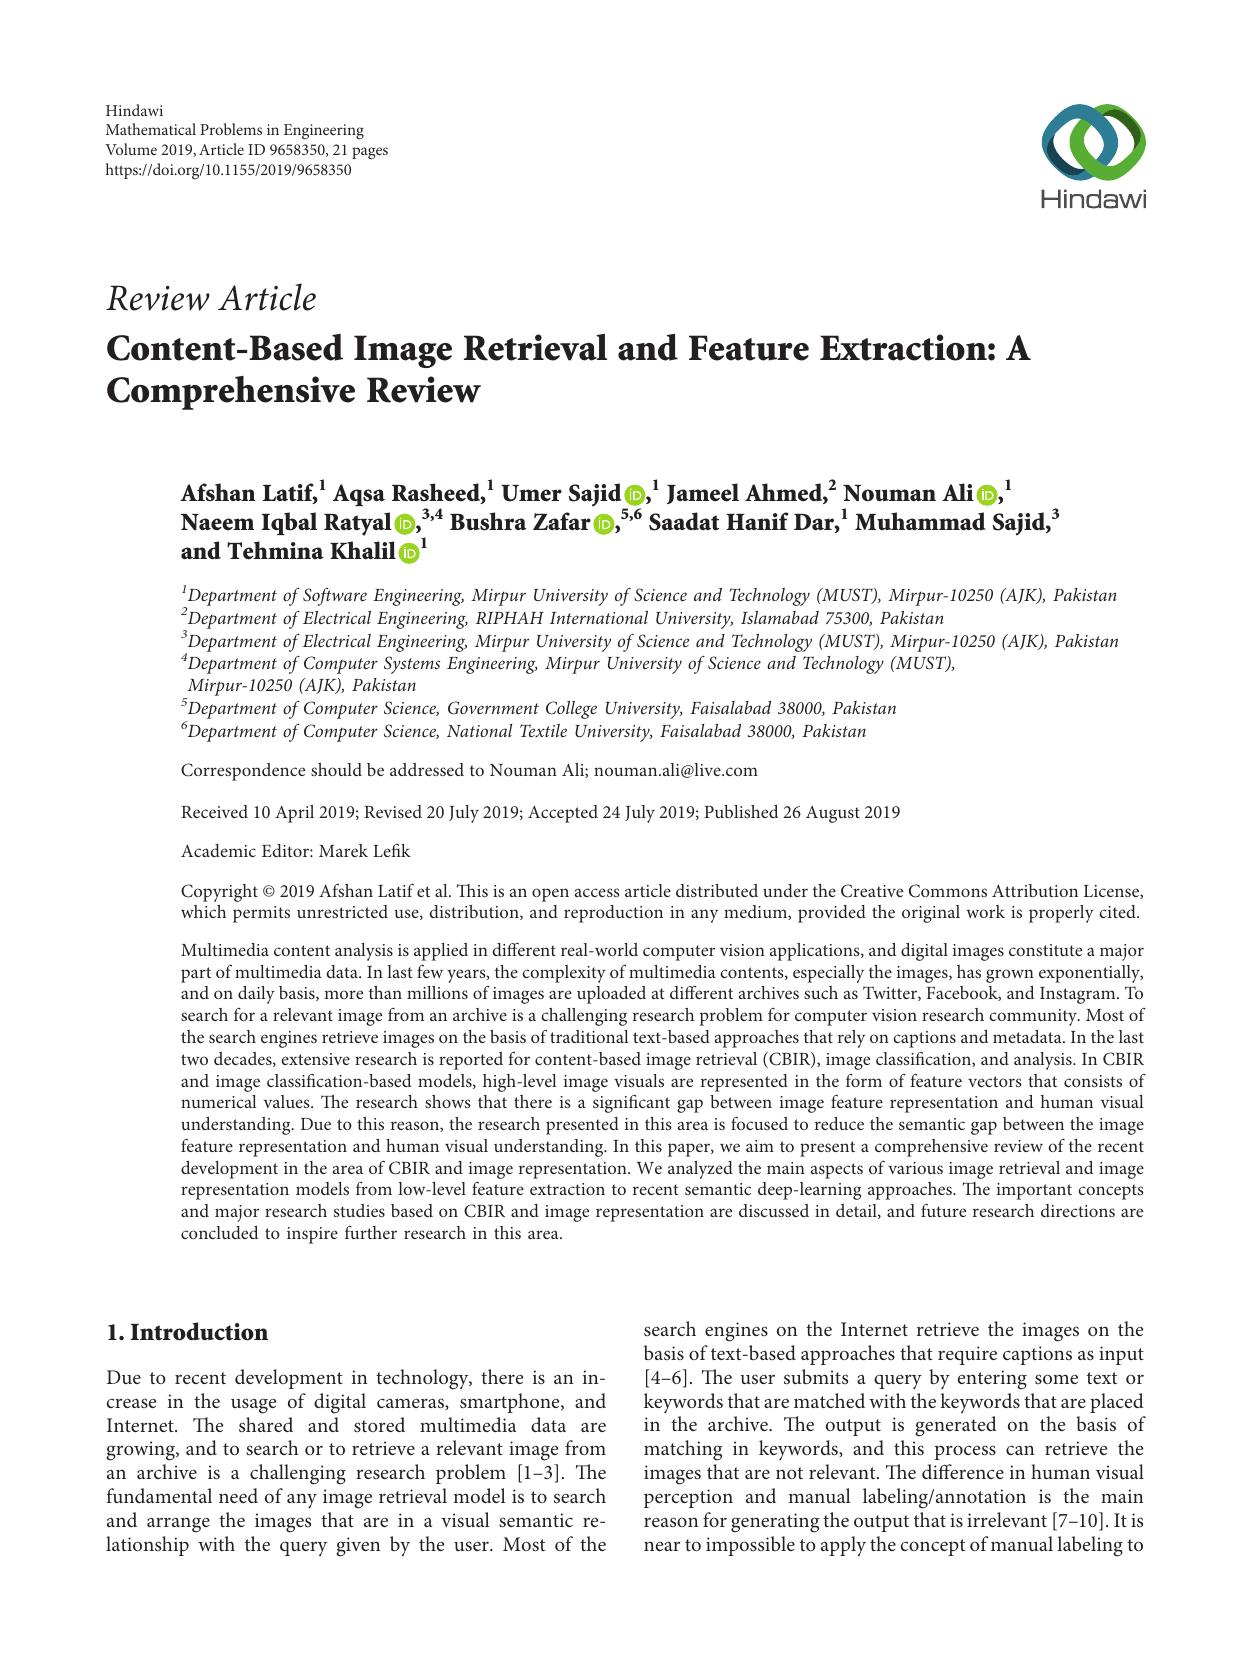 Content-Based Image Retrieval and Feature Extraction: A  Comprehensive Review - Article